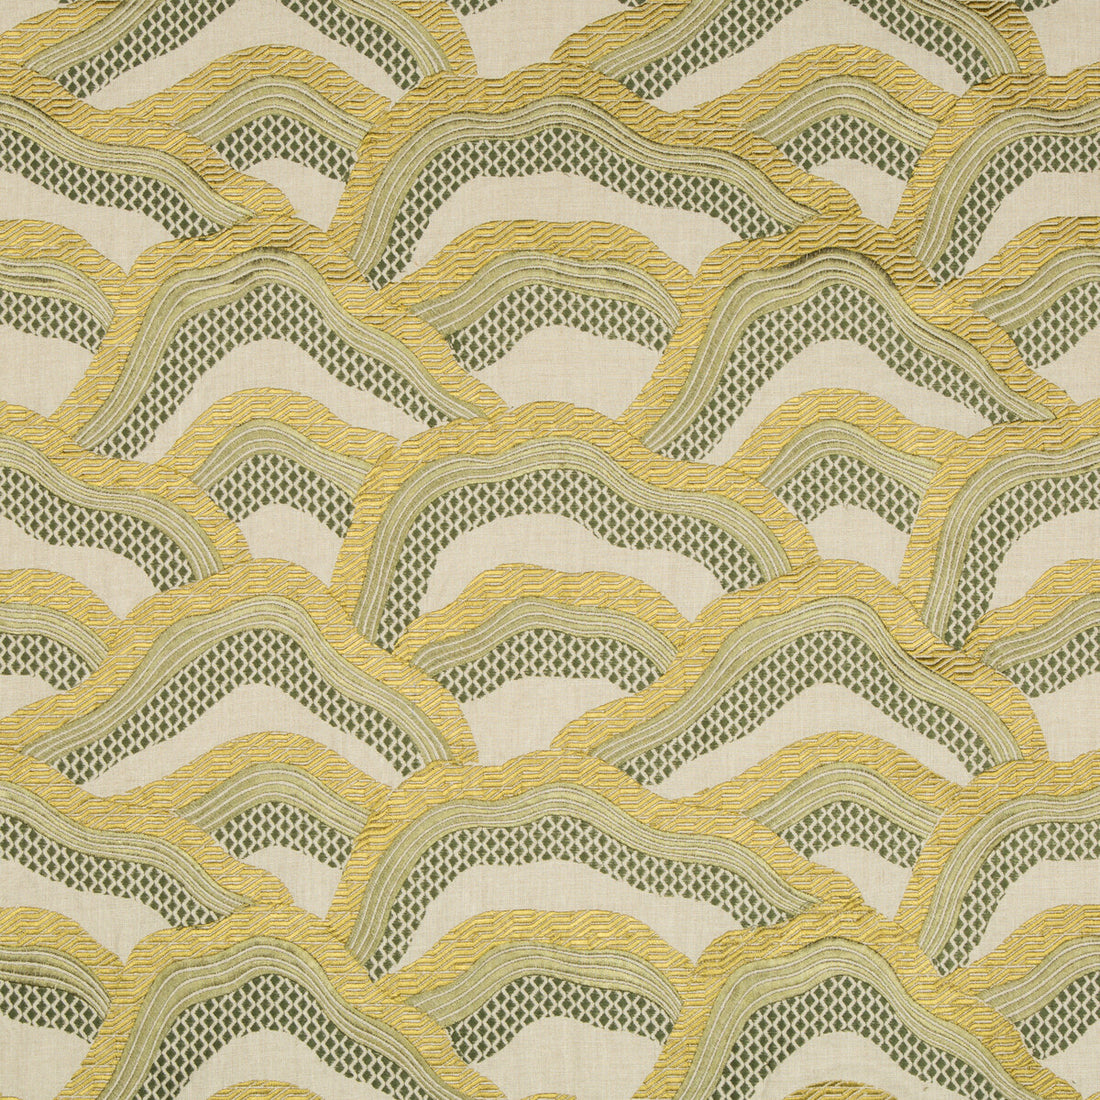 Les Rizieres Emb fabric in citron color - pattern 8017127.340.0 - by Brunschwig &amp; Fils in the Les Ensembliers collection